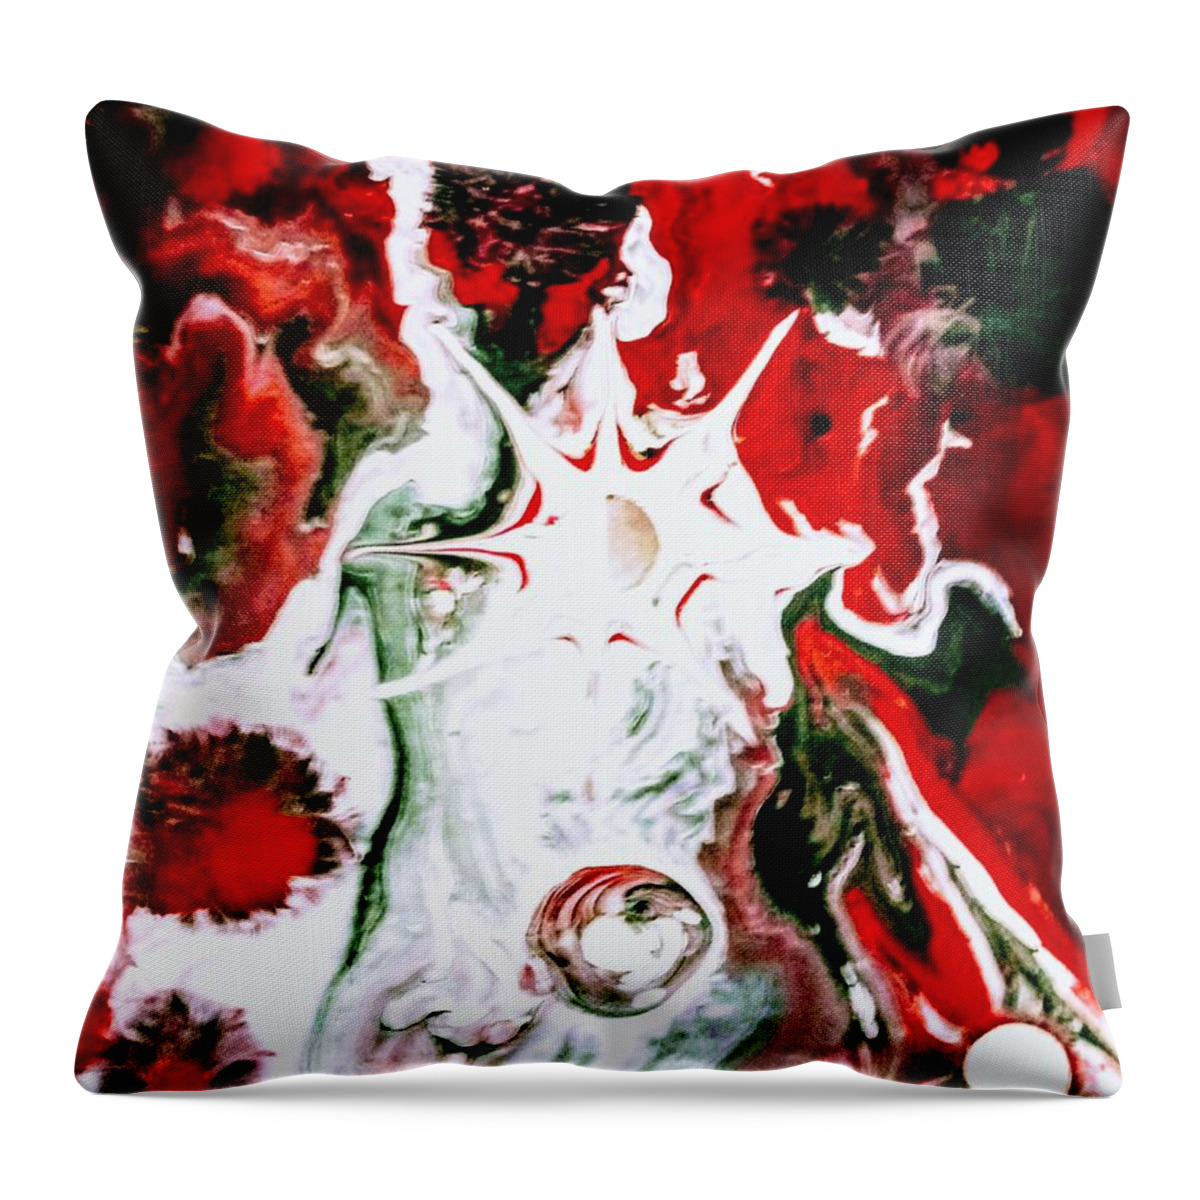 Scary Throw Pillow featuring the painting The nightmare by Anna Adams